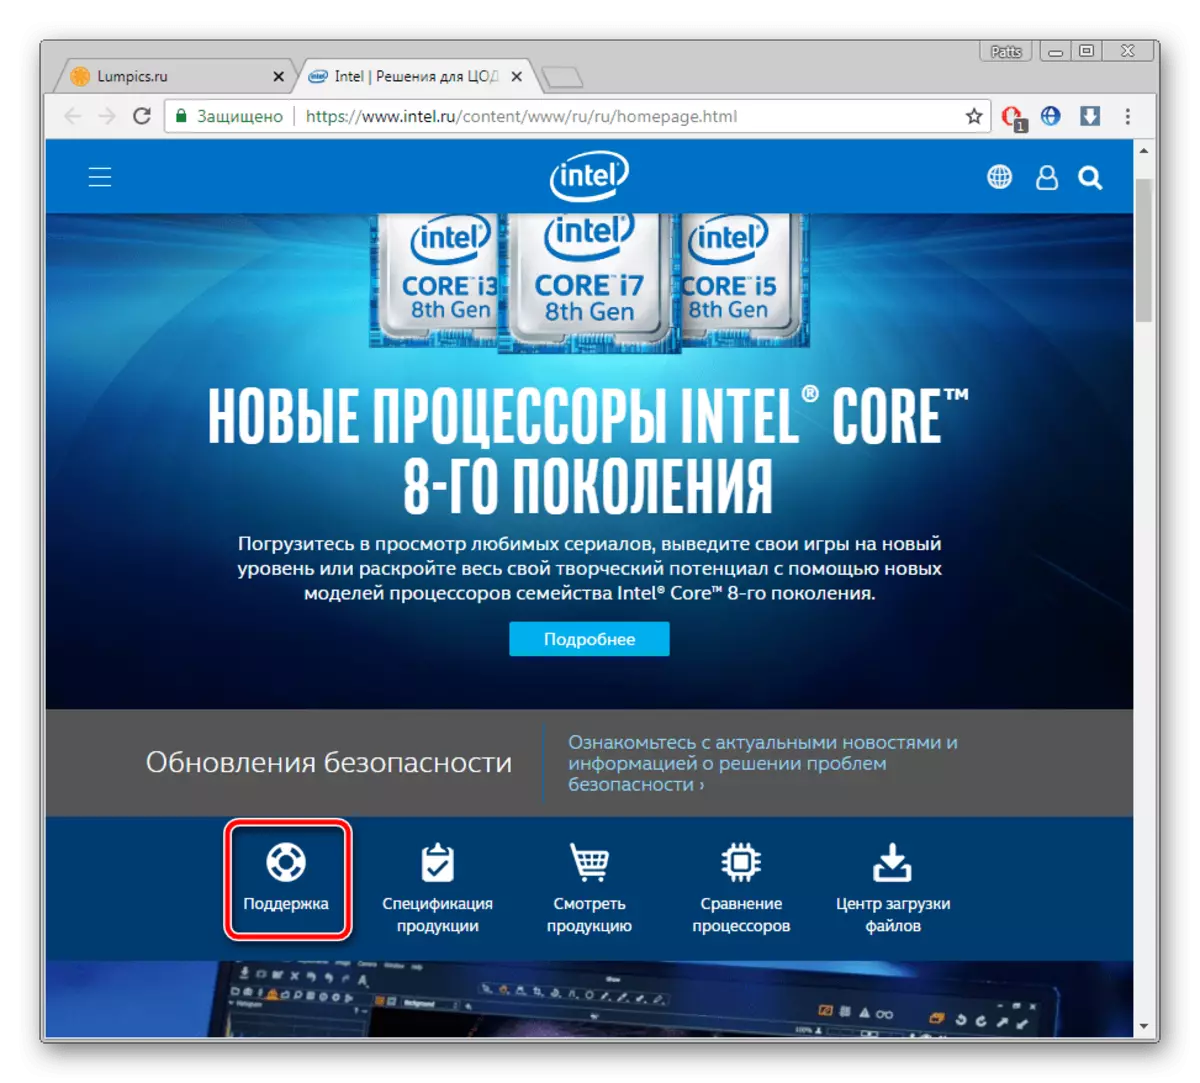 Support page on the site for Intel HD Graphics 4600